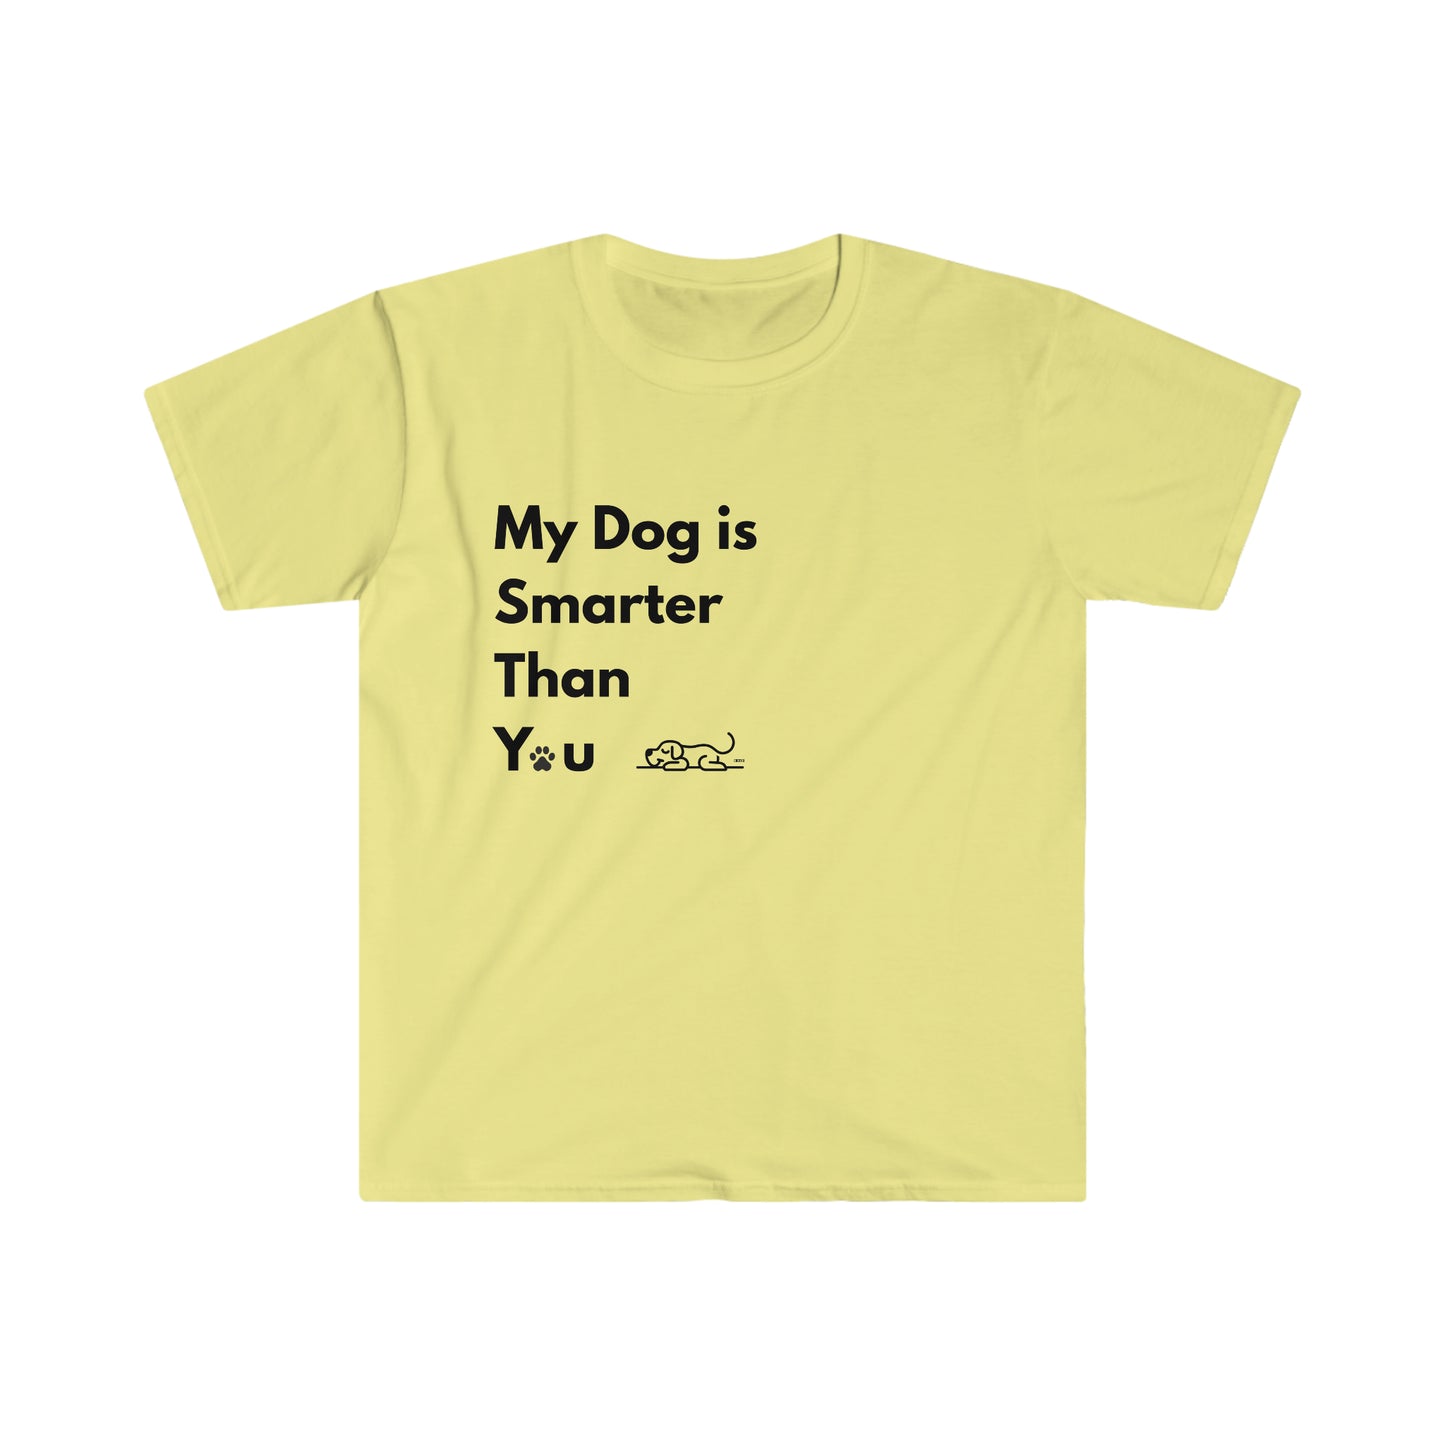 My Dog is Smarter than You, Unisex Softstyle T-Shirt